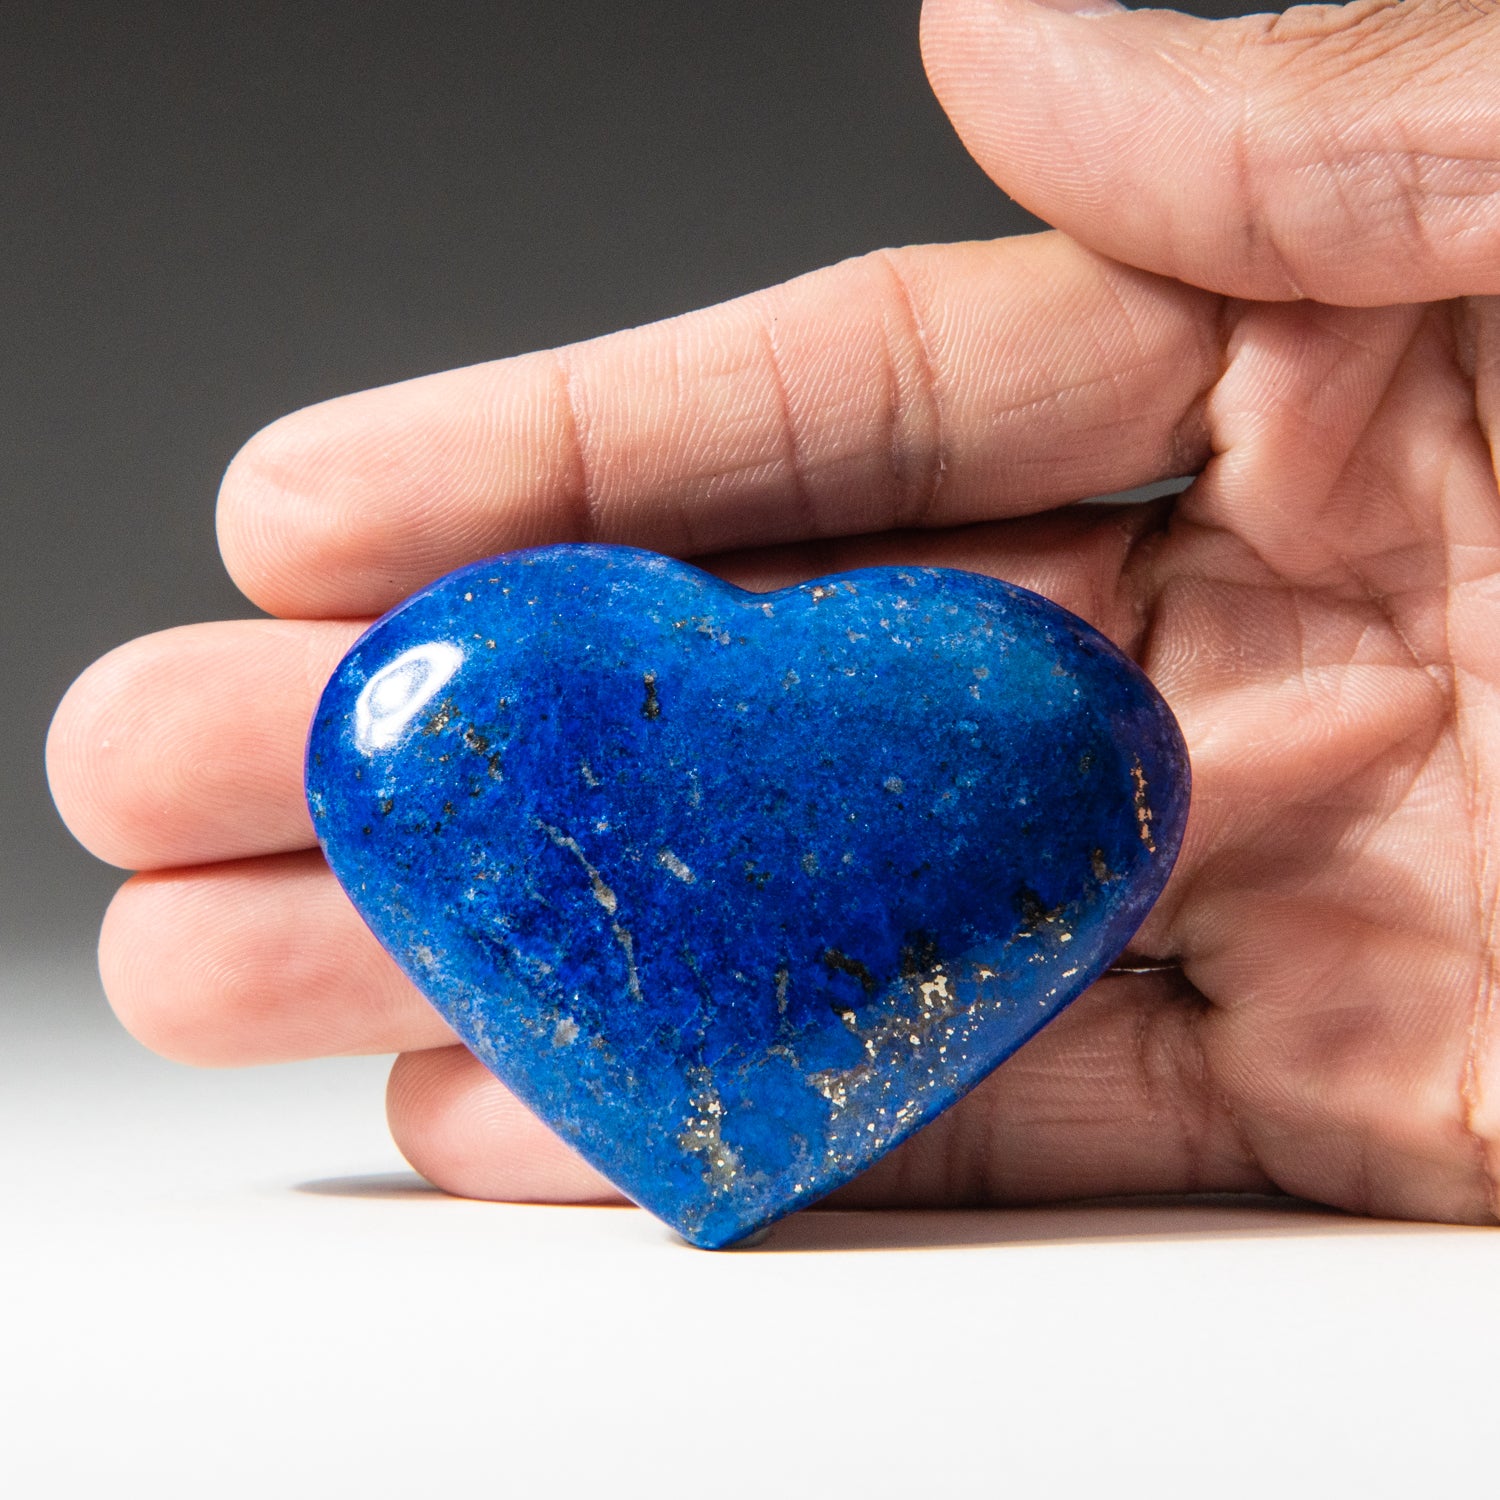 Polished Lapis Lazuli Heart from Afghanistan (60 grams)